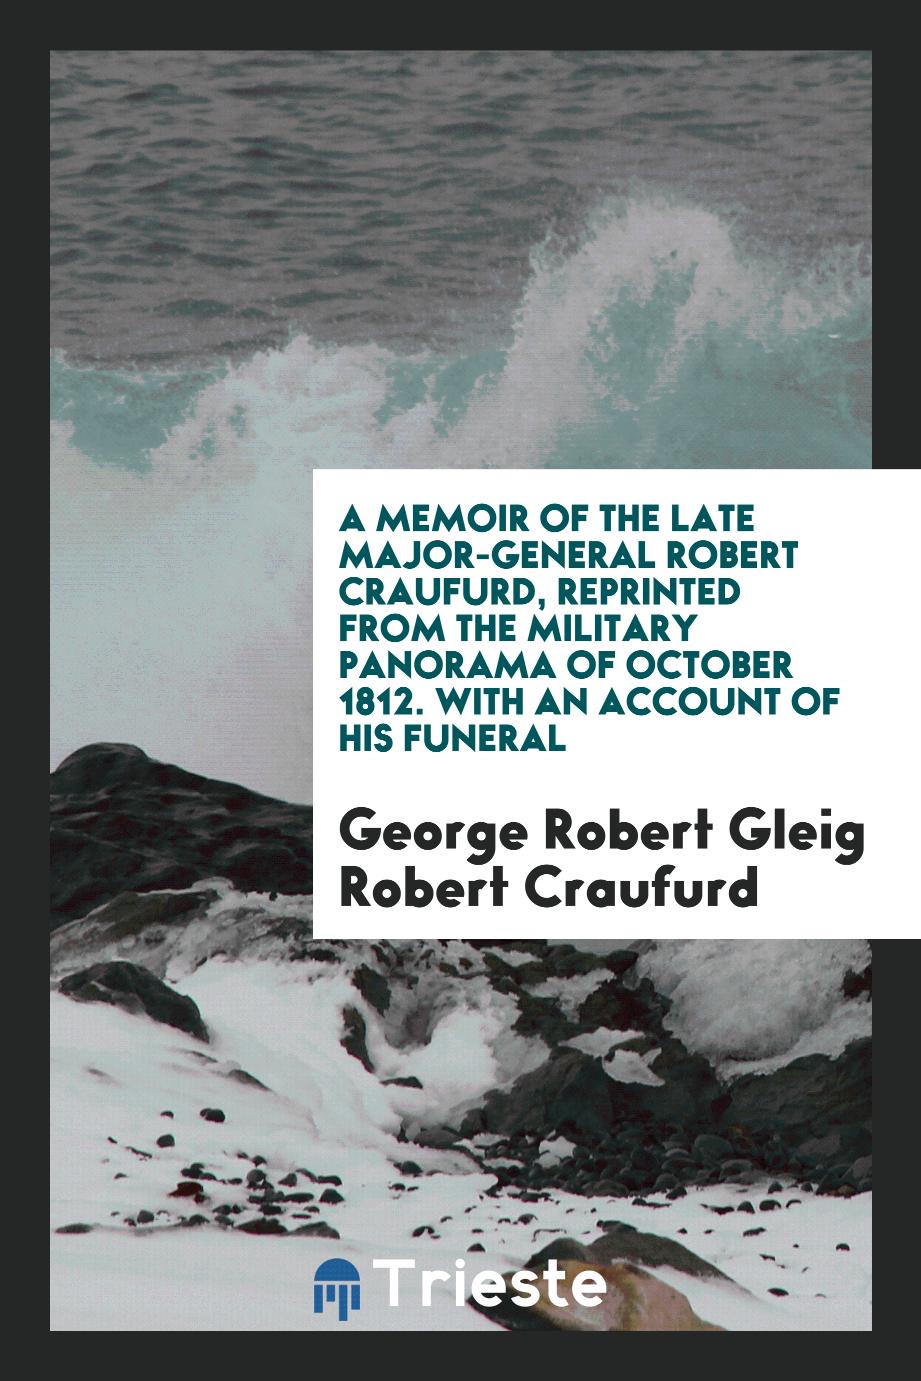 A Memoir of the late Major-General Robert Craufurd, reprinted from the Military Panorama of October 1812. With an account of his funeral